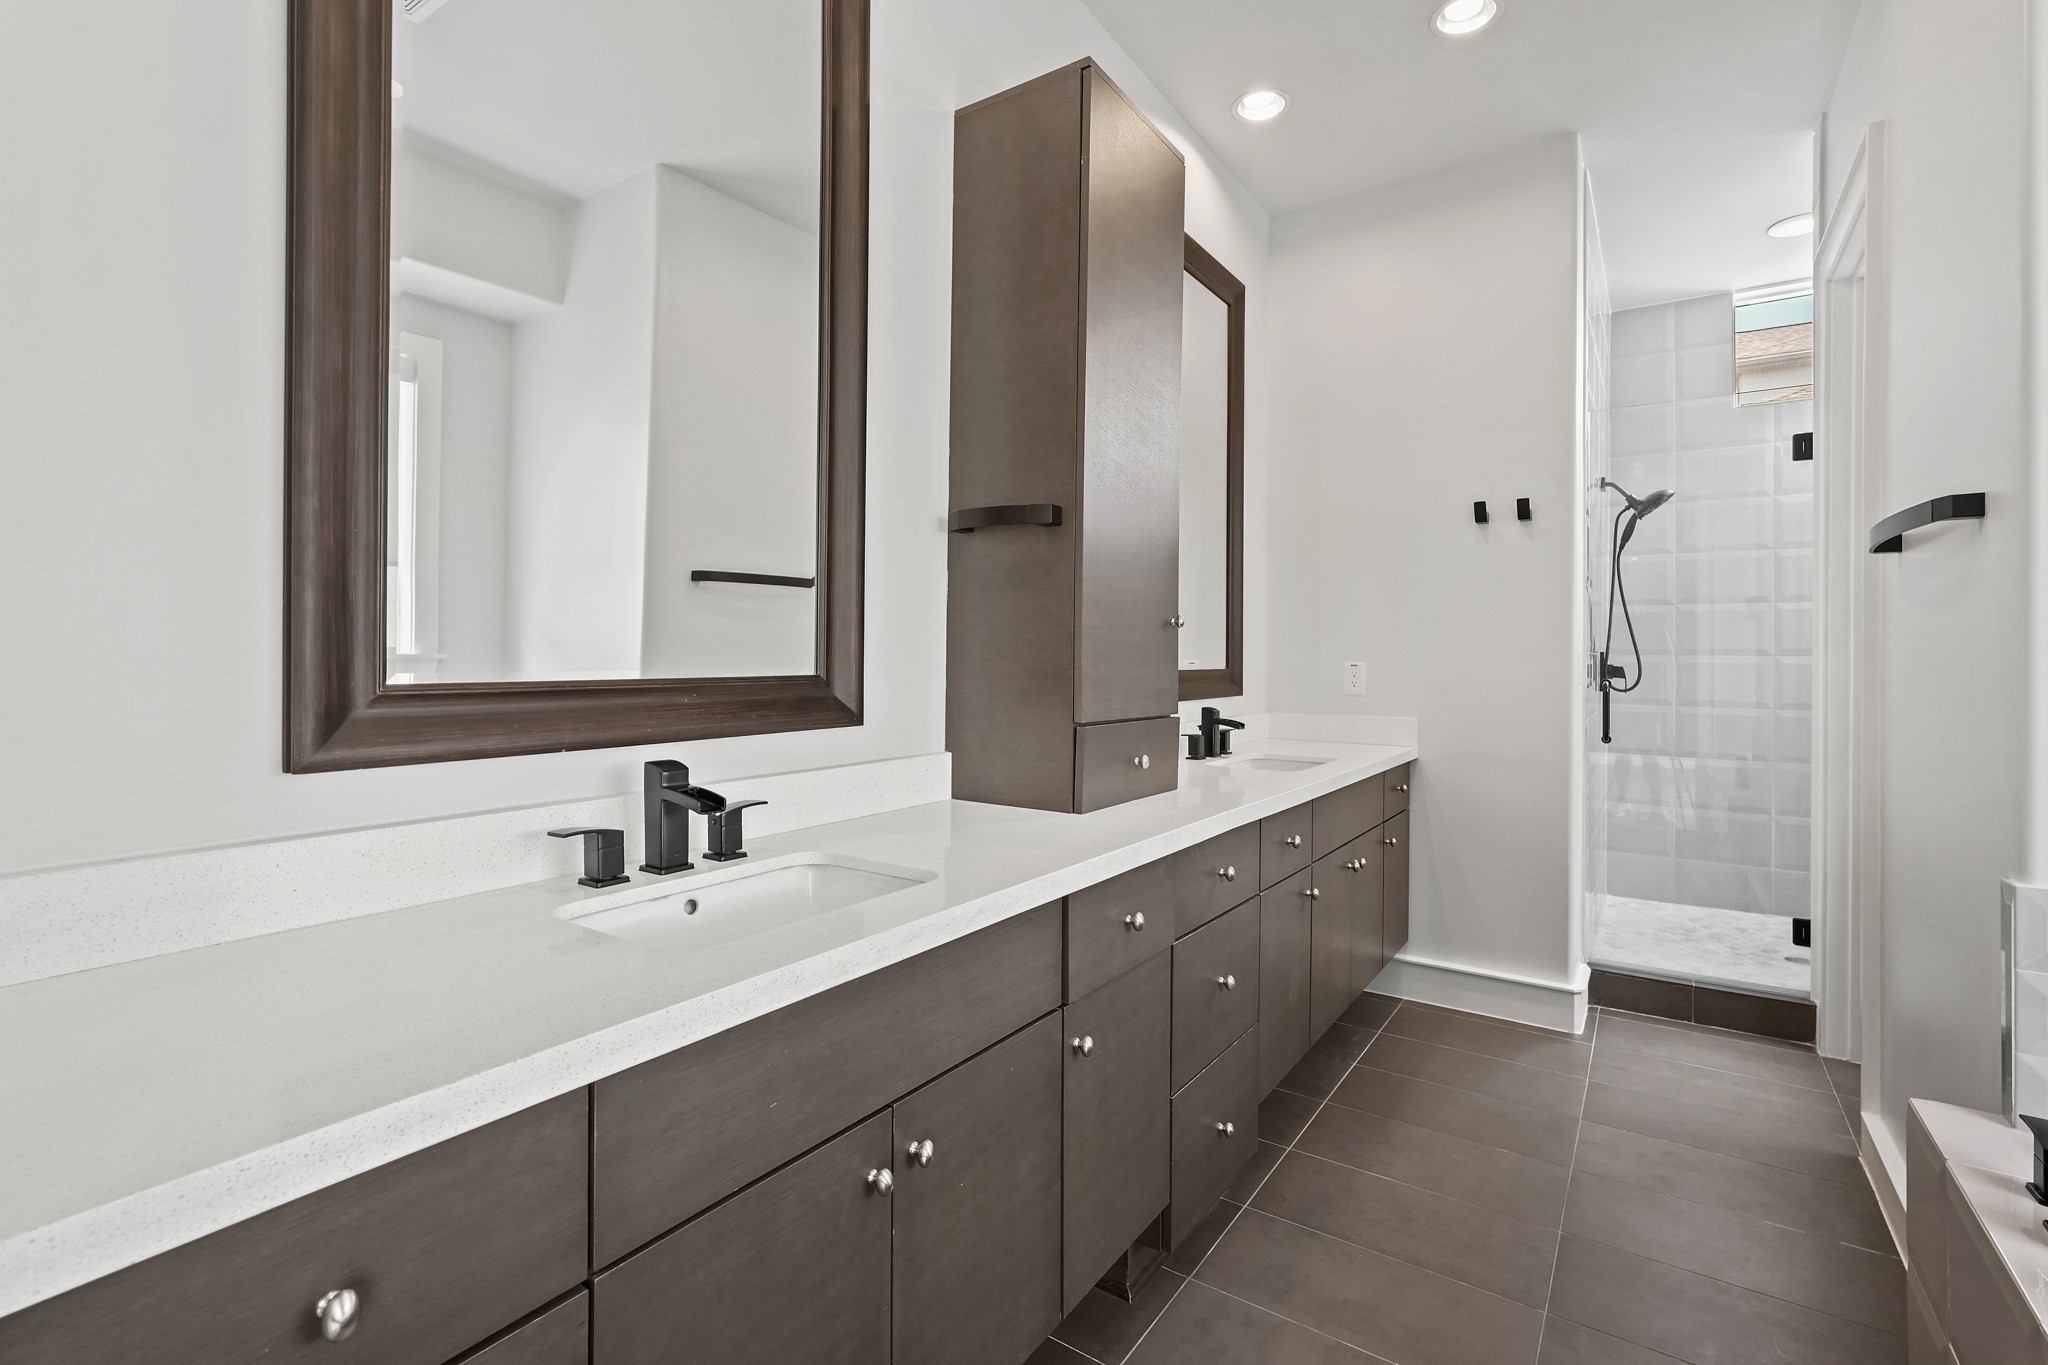 Dual Sinks & Large Wall Mirrors Adorn the Space allowing Morning / Nightly Rituals to be Relaxing & Luxurious. Featuring Ample Storage